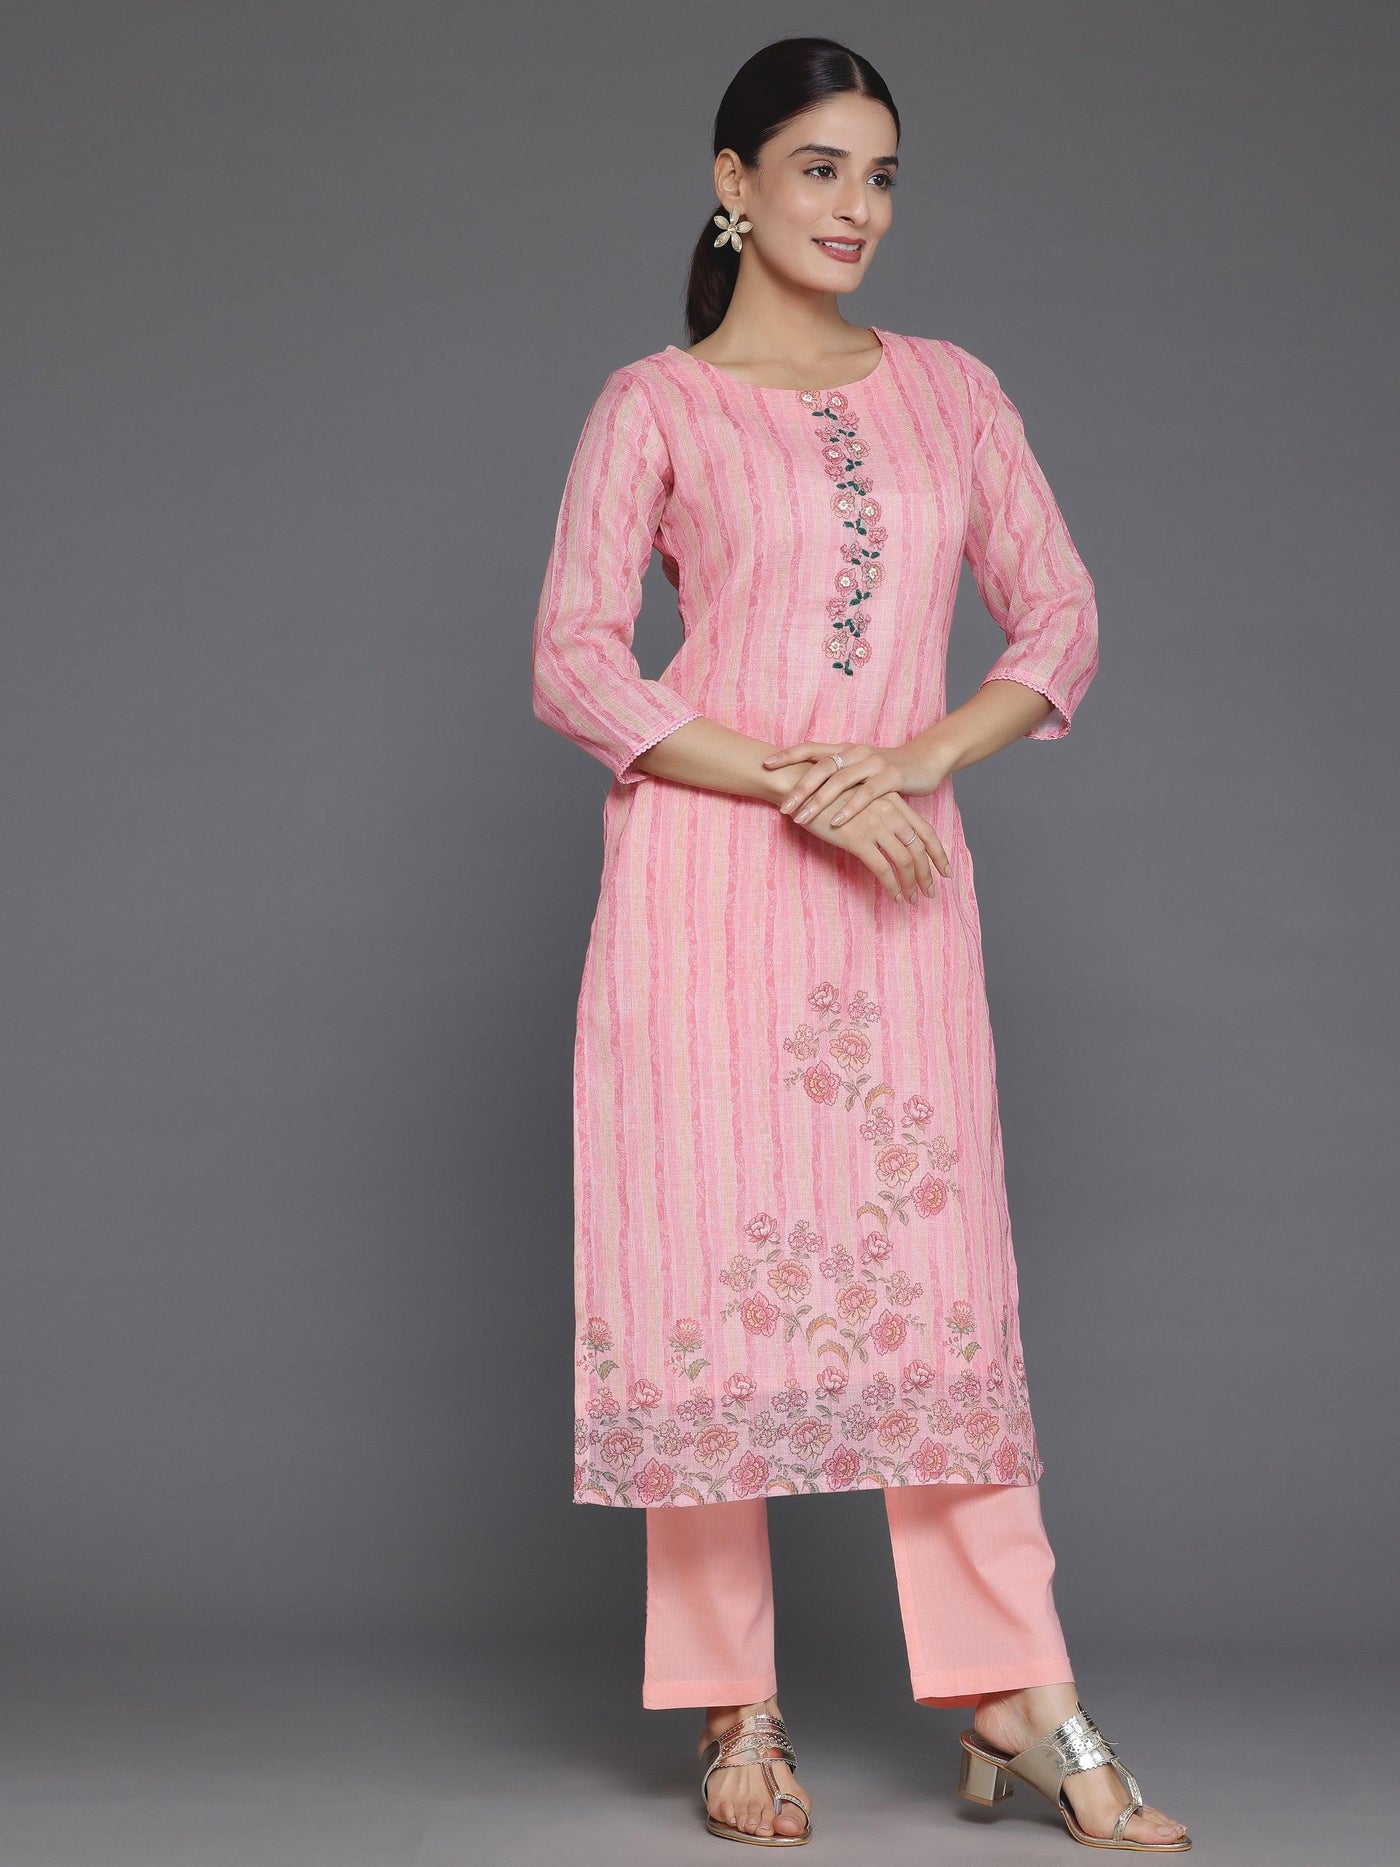 Pink Printed Cotton Straight Suit With Dupatta - Libas